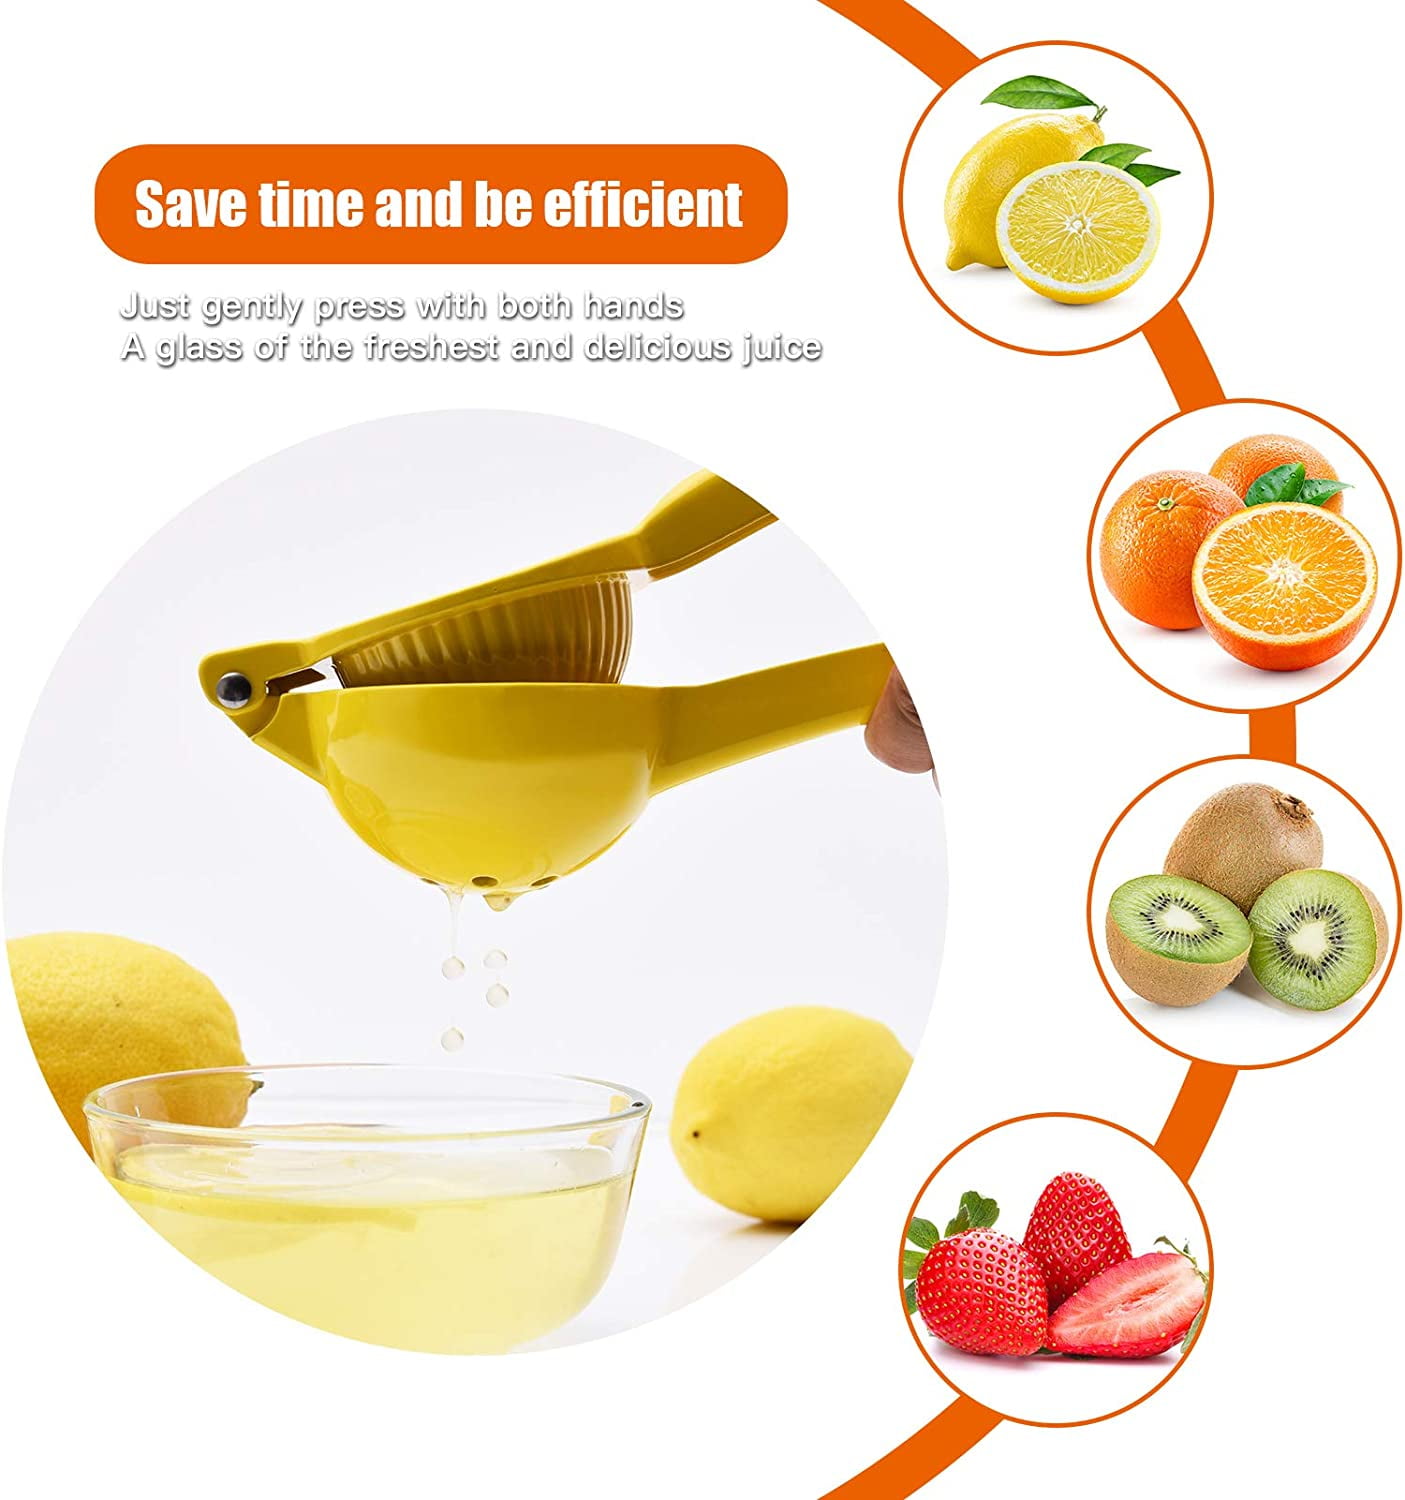 Yellow Lime Juice Press A-Yellow Premium Quality Metal Lemon Squeezer Manual Press Citrus Juicer For Squeeze The Freshest Juice